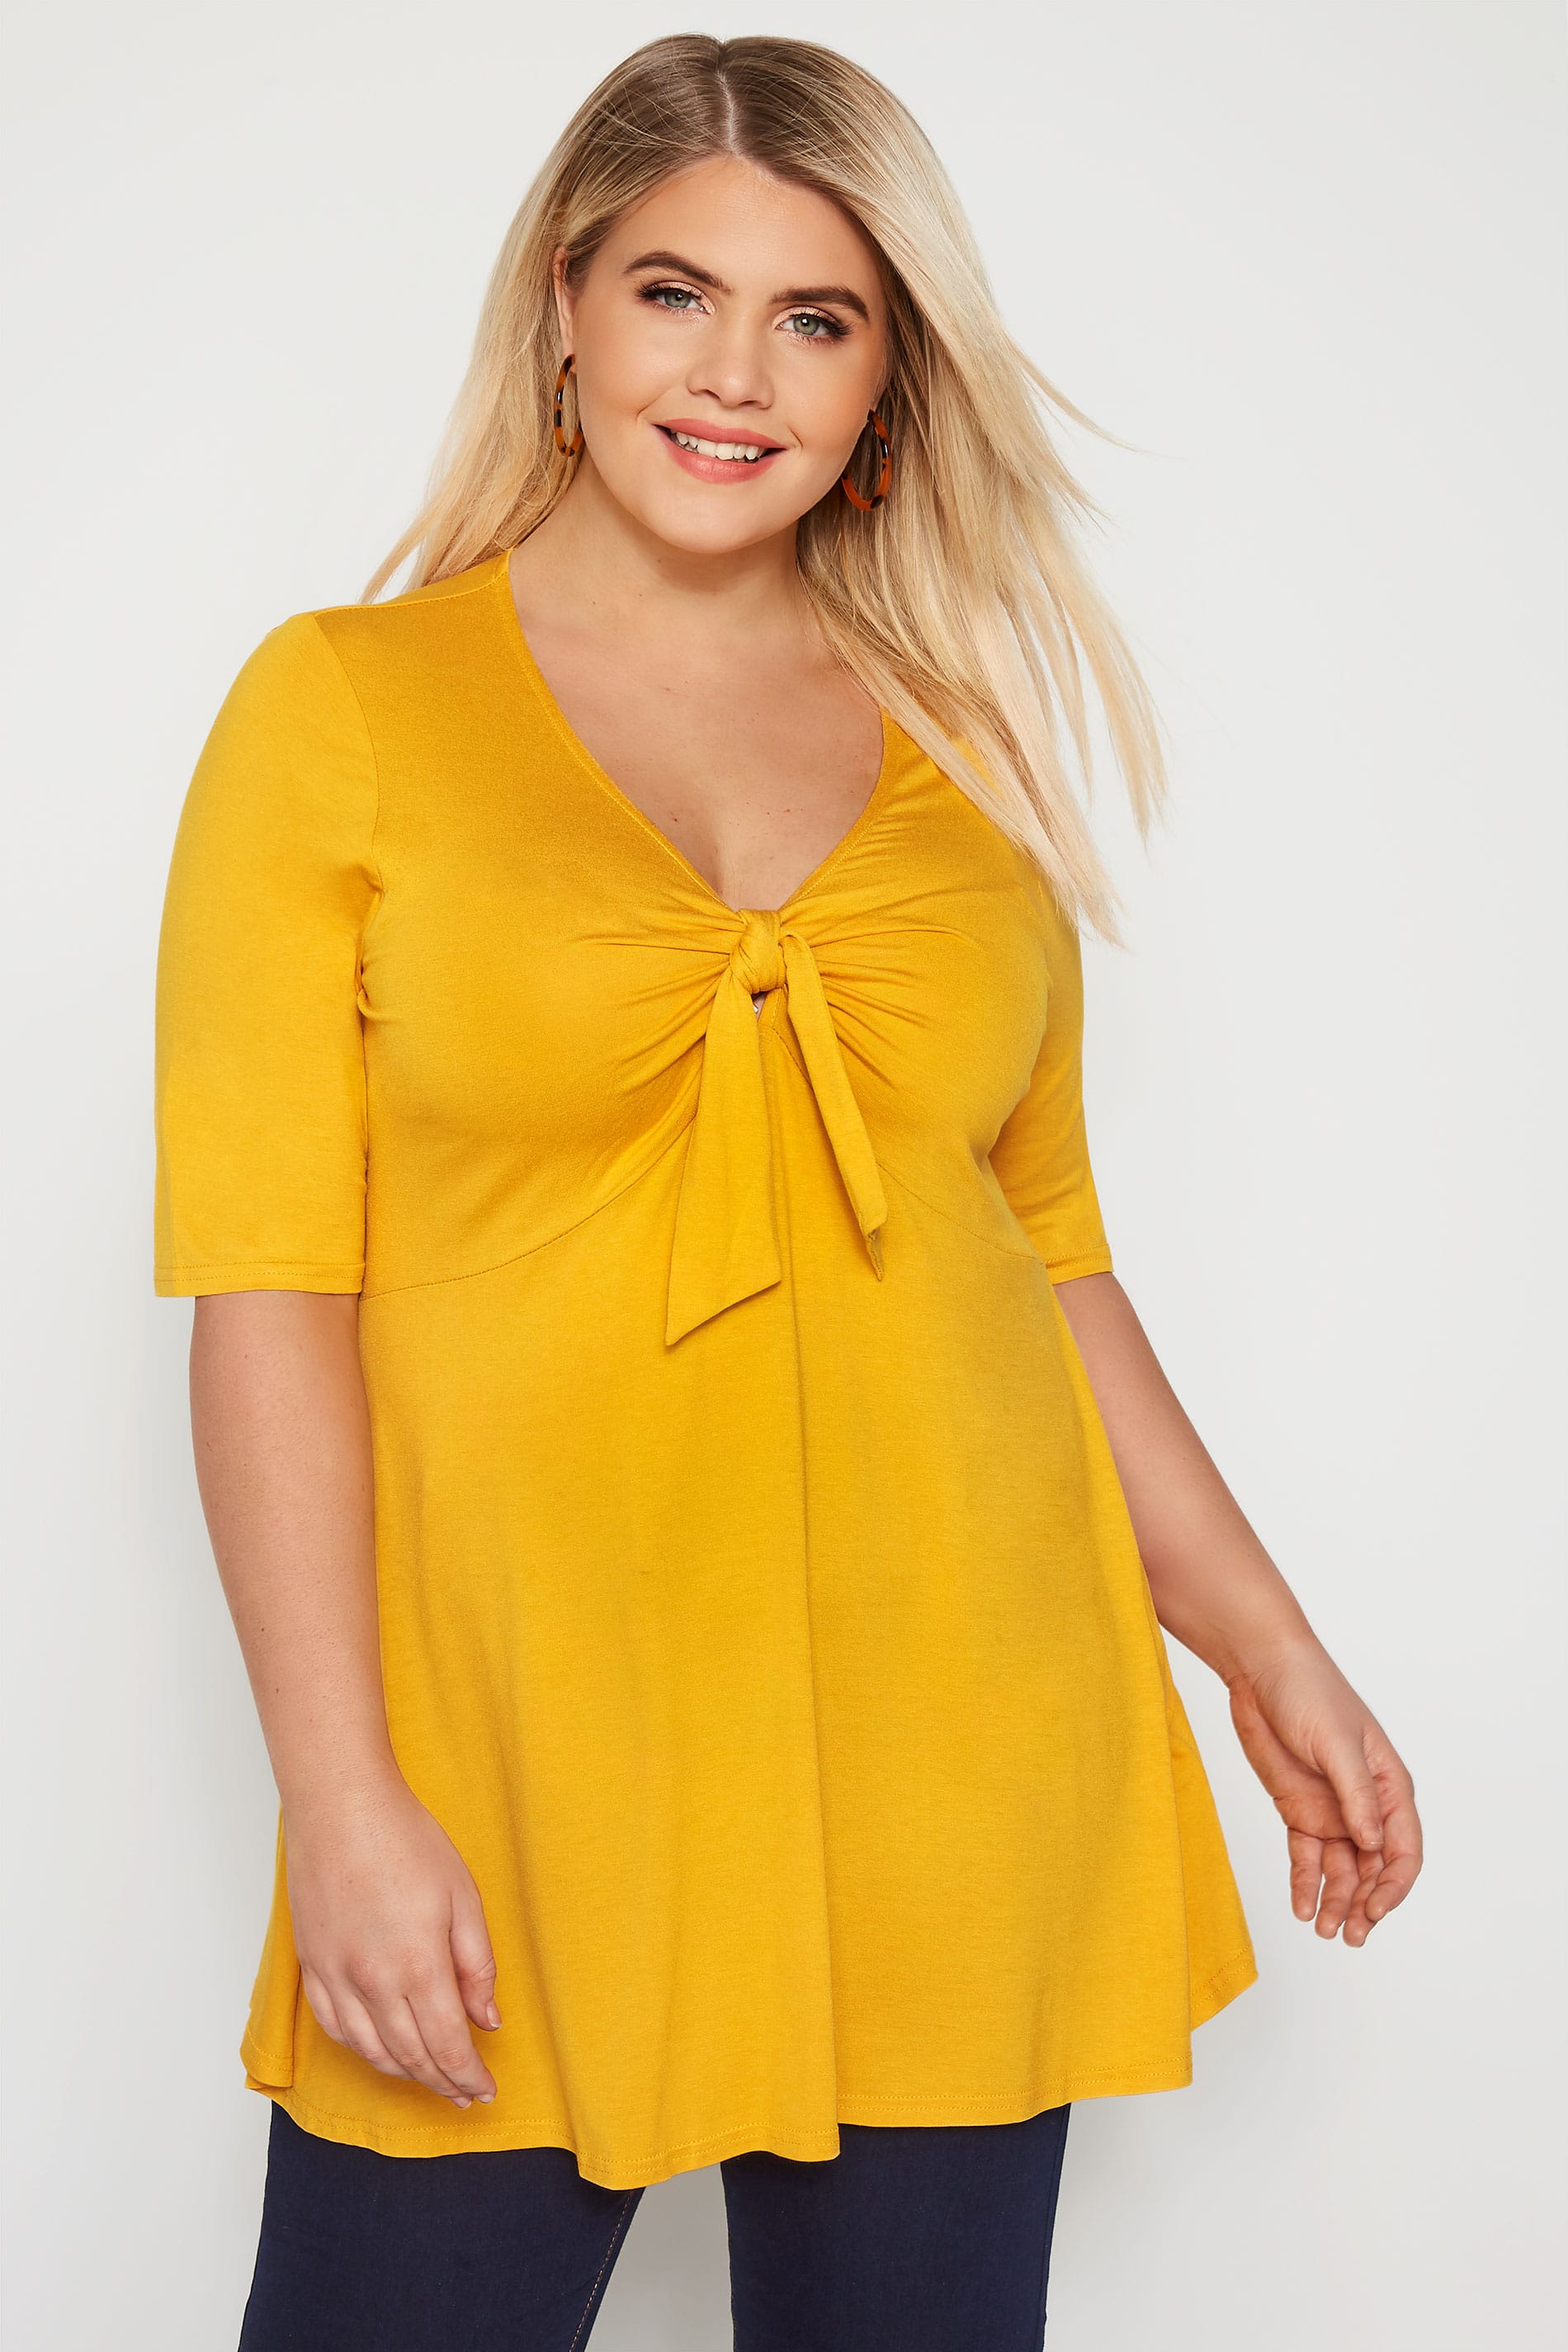 Plus Size Yellow Tie Knot Top | Sizes 16 to 36 | Yours Clothing